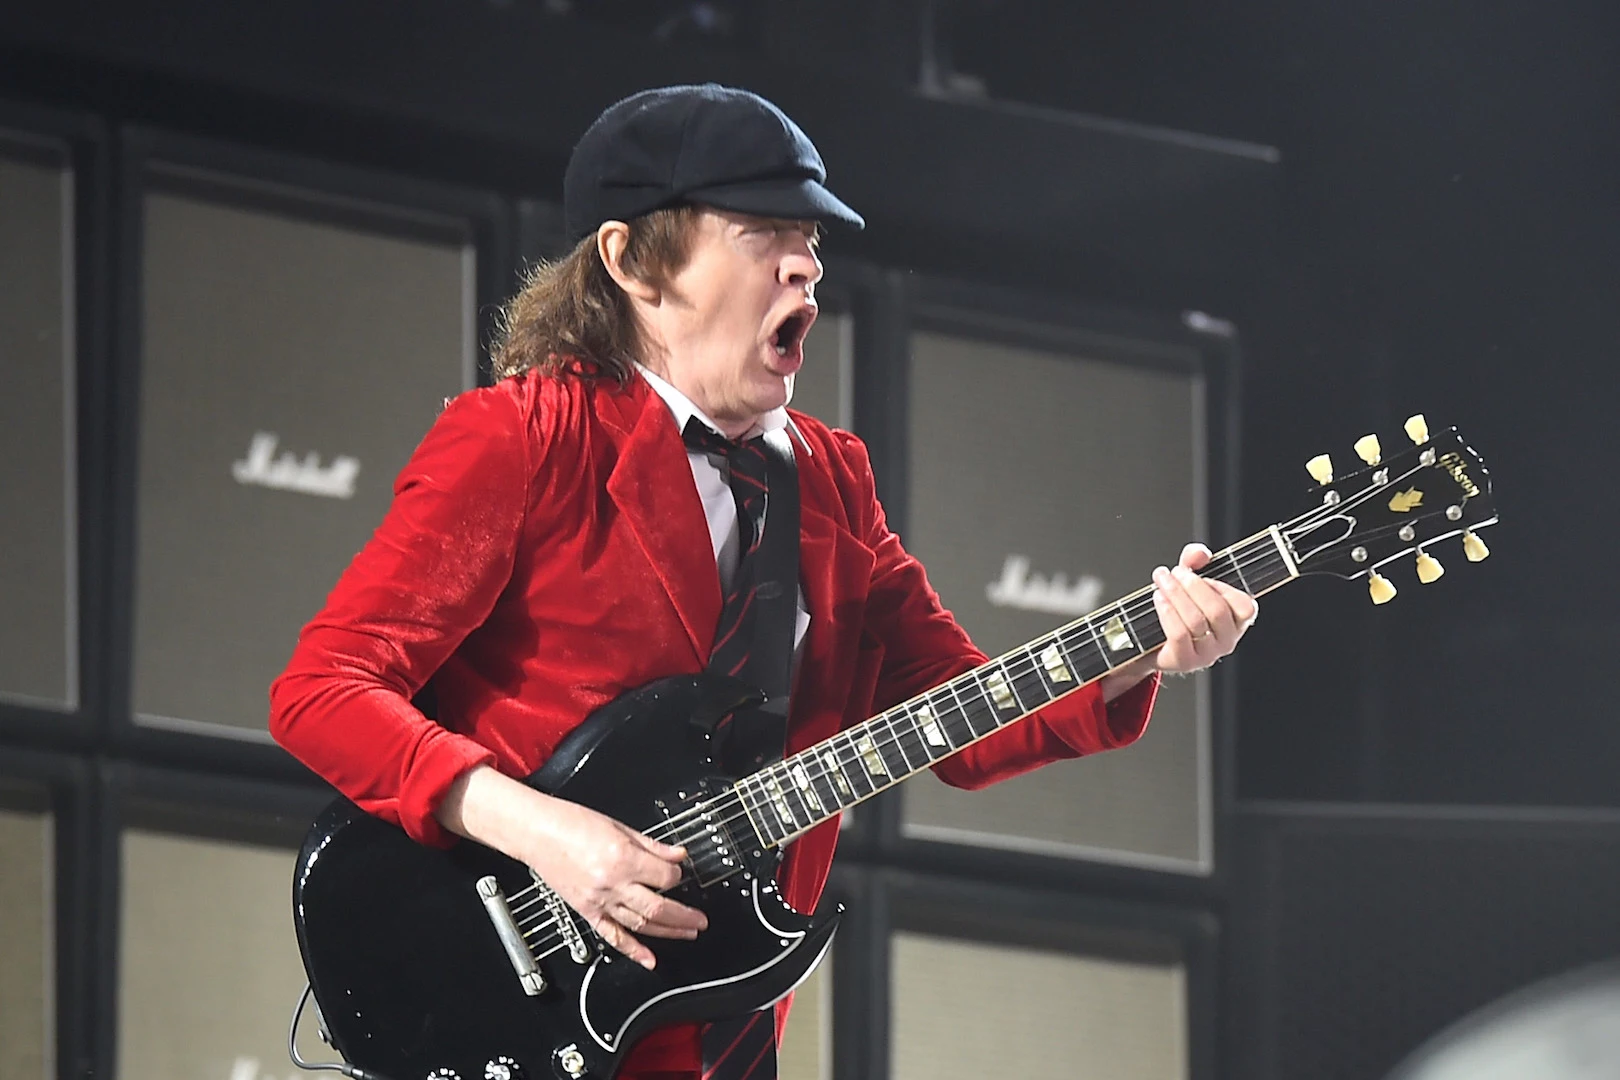 AC/DC Auditioned a Surprising Singer Before Hiring Axl Rose